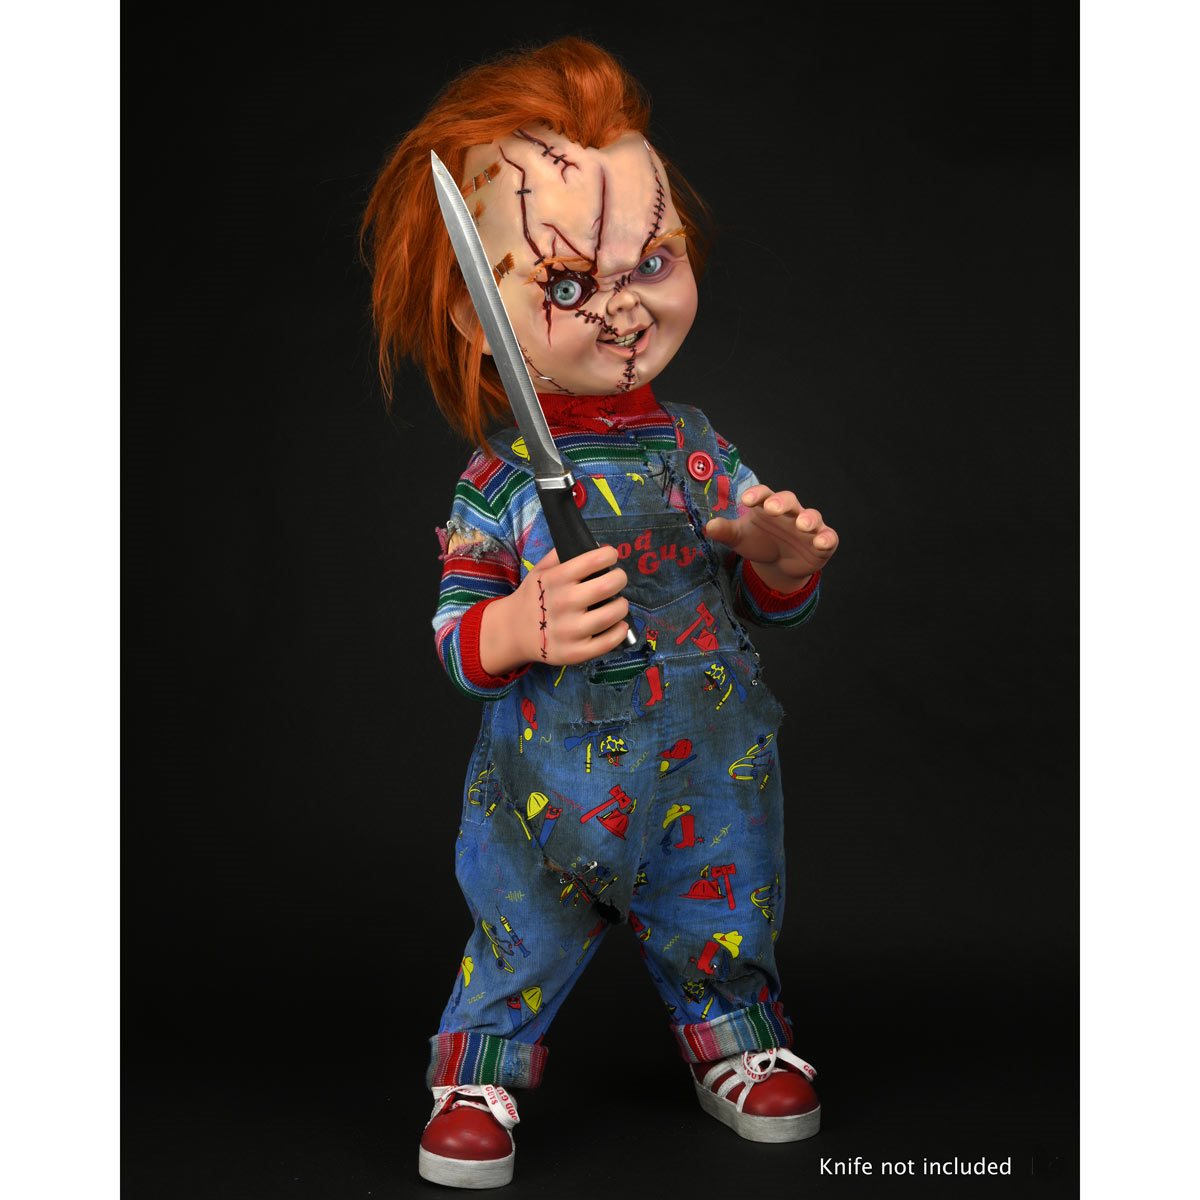 bhinder atwal recommends Pictures Of Chucky